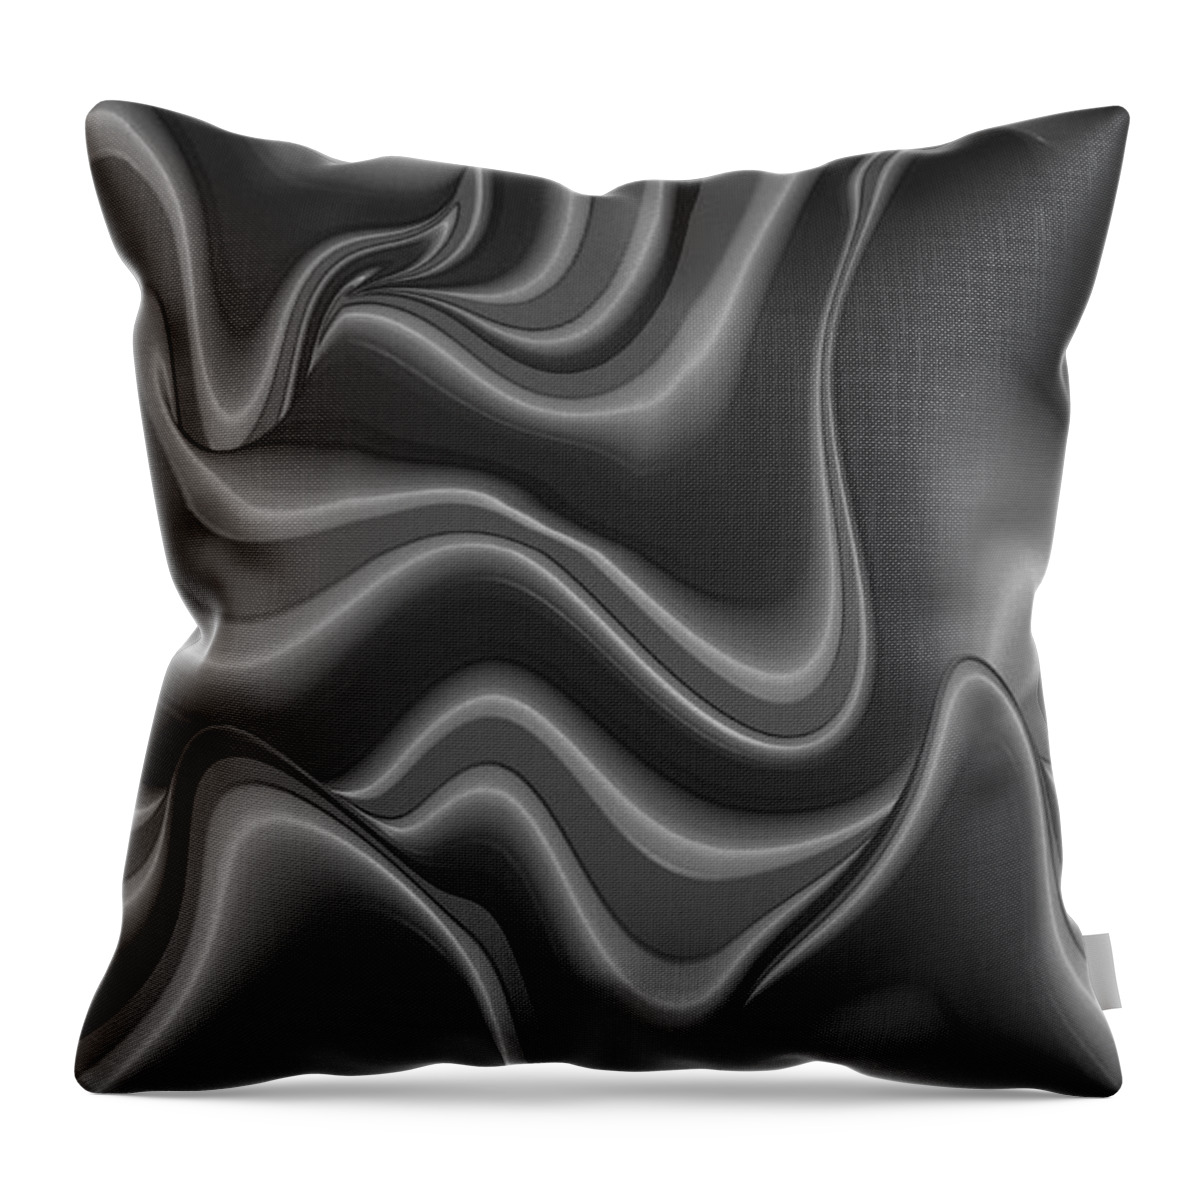 Curves Throw Pillow featuring the digital art Abstract 515 2 by Kae Cheatham